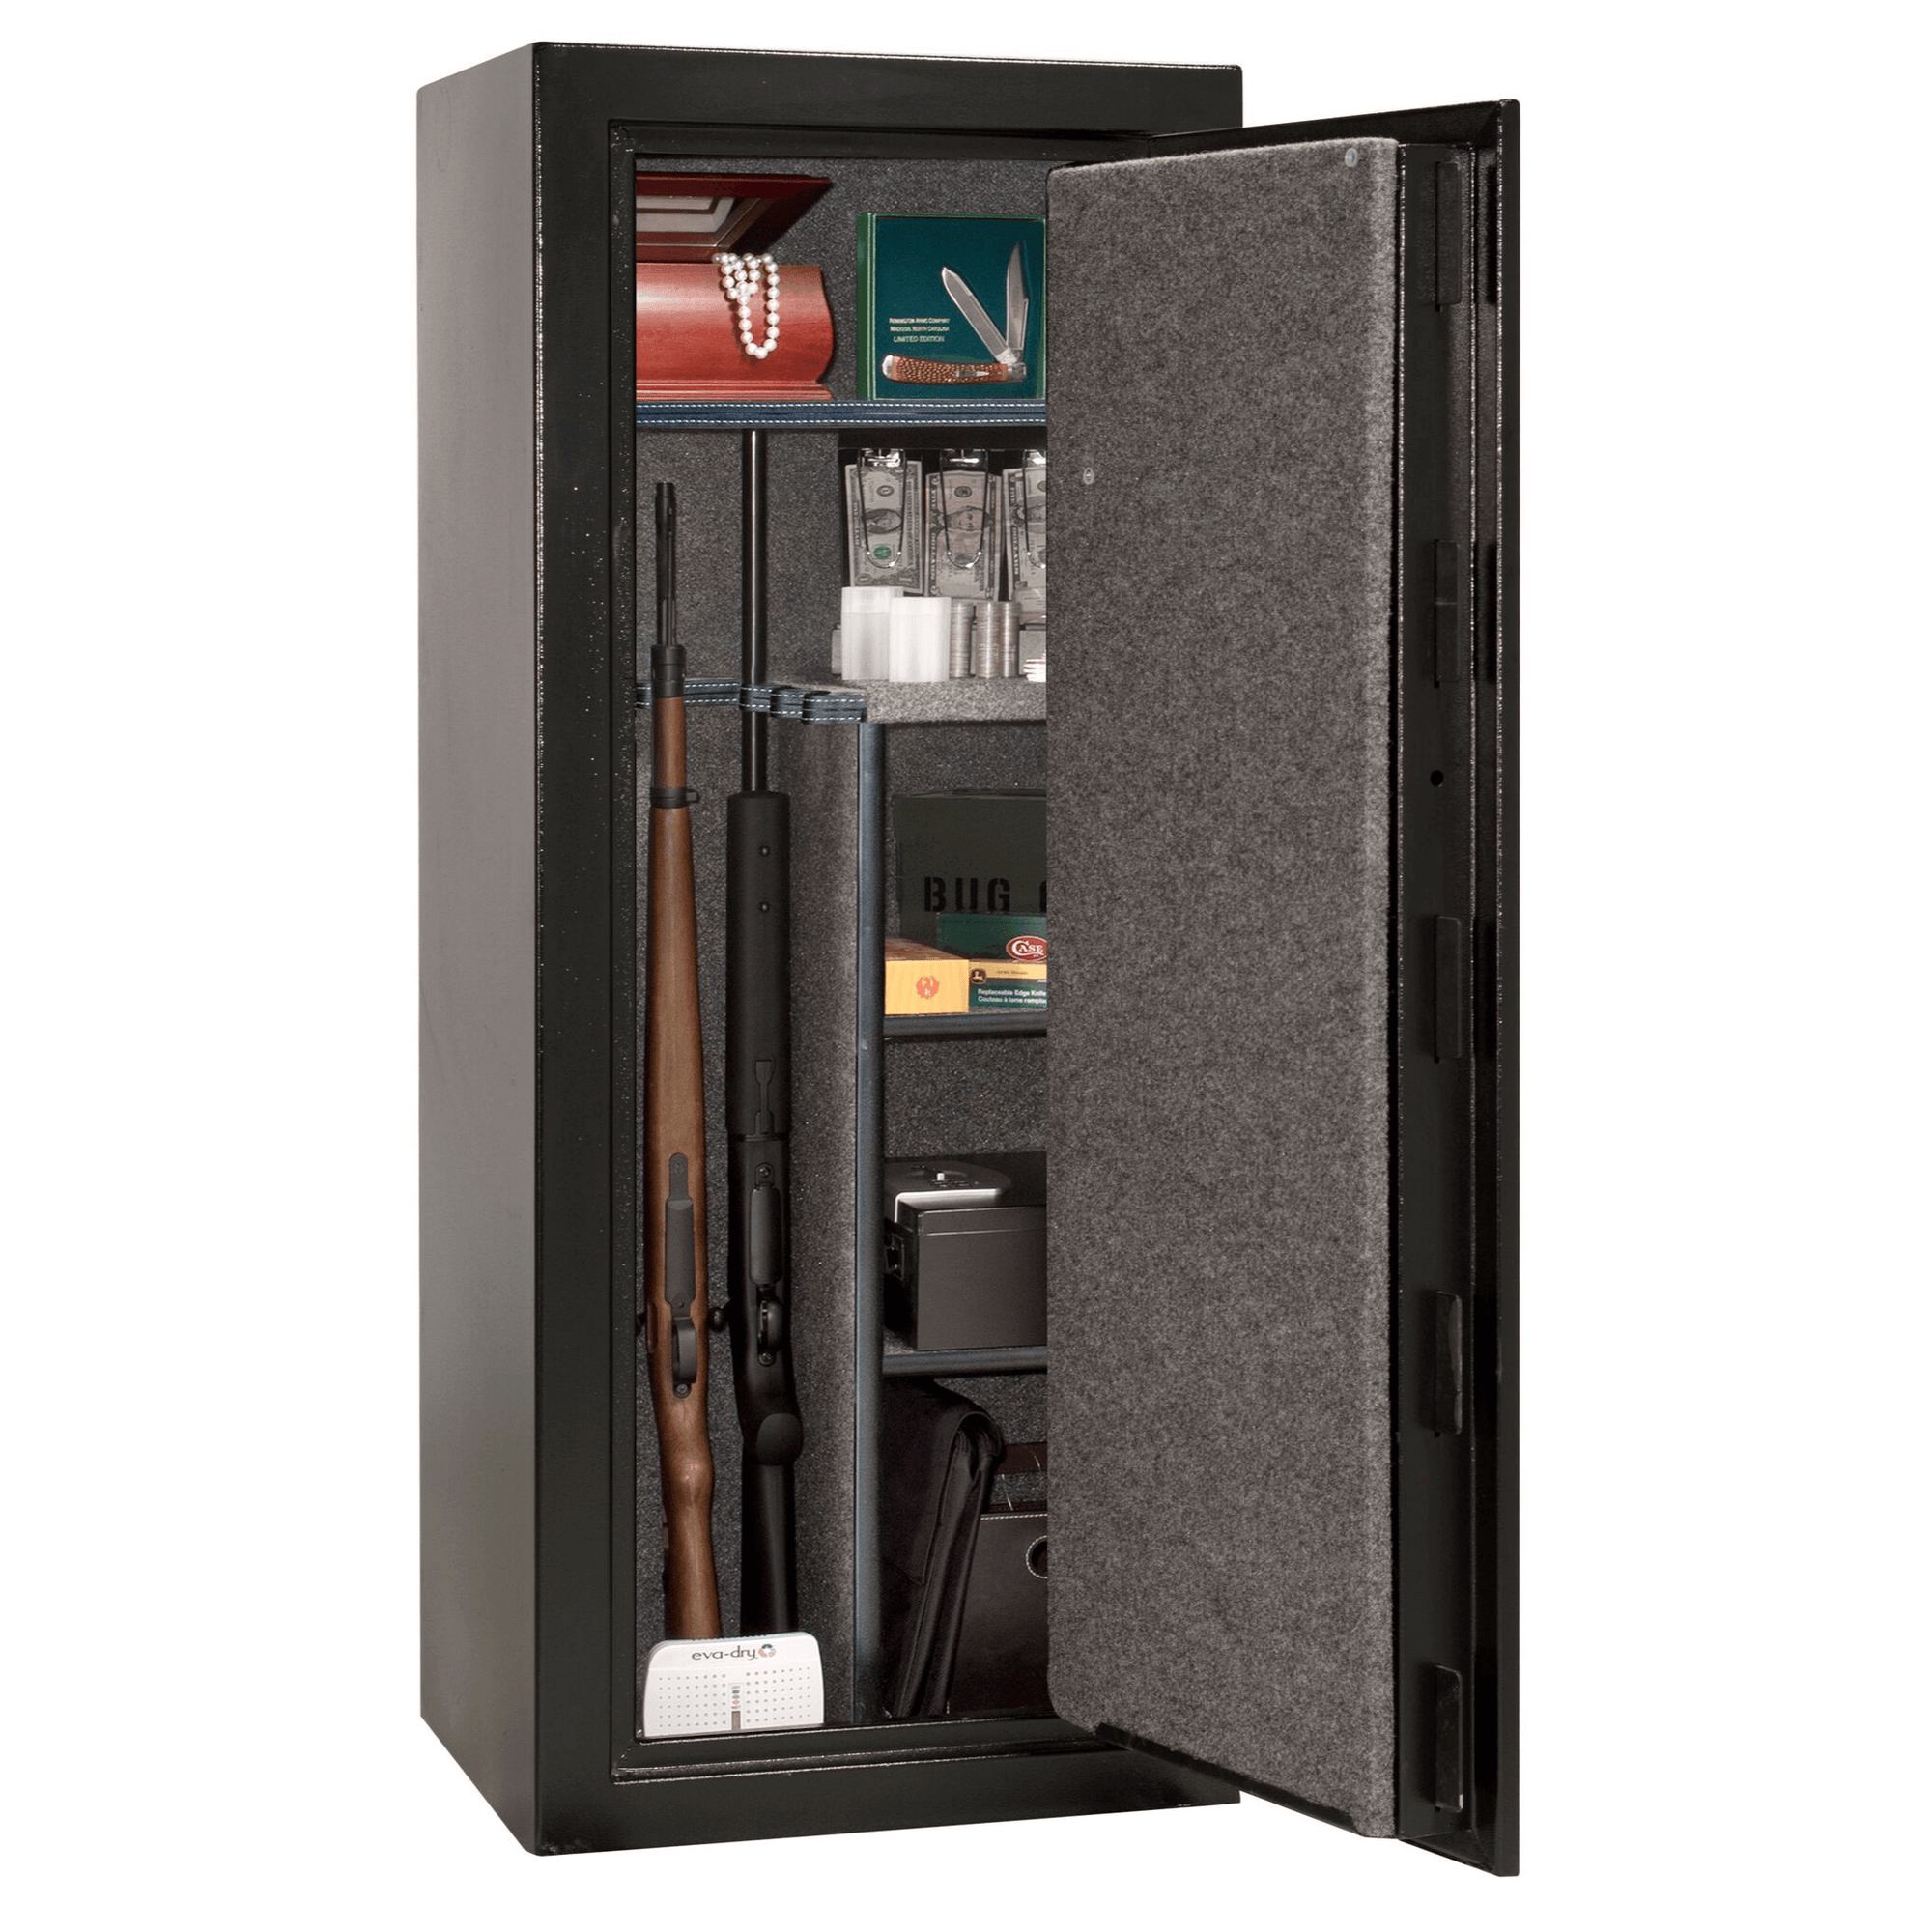 Centurion 18 | Level 1 Security | 30 Minute Fire Protection | Liberty Safe Norcal.